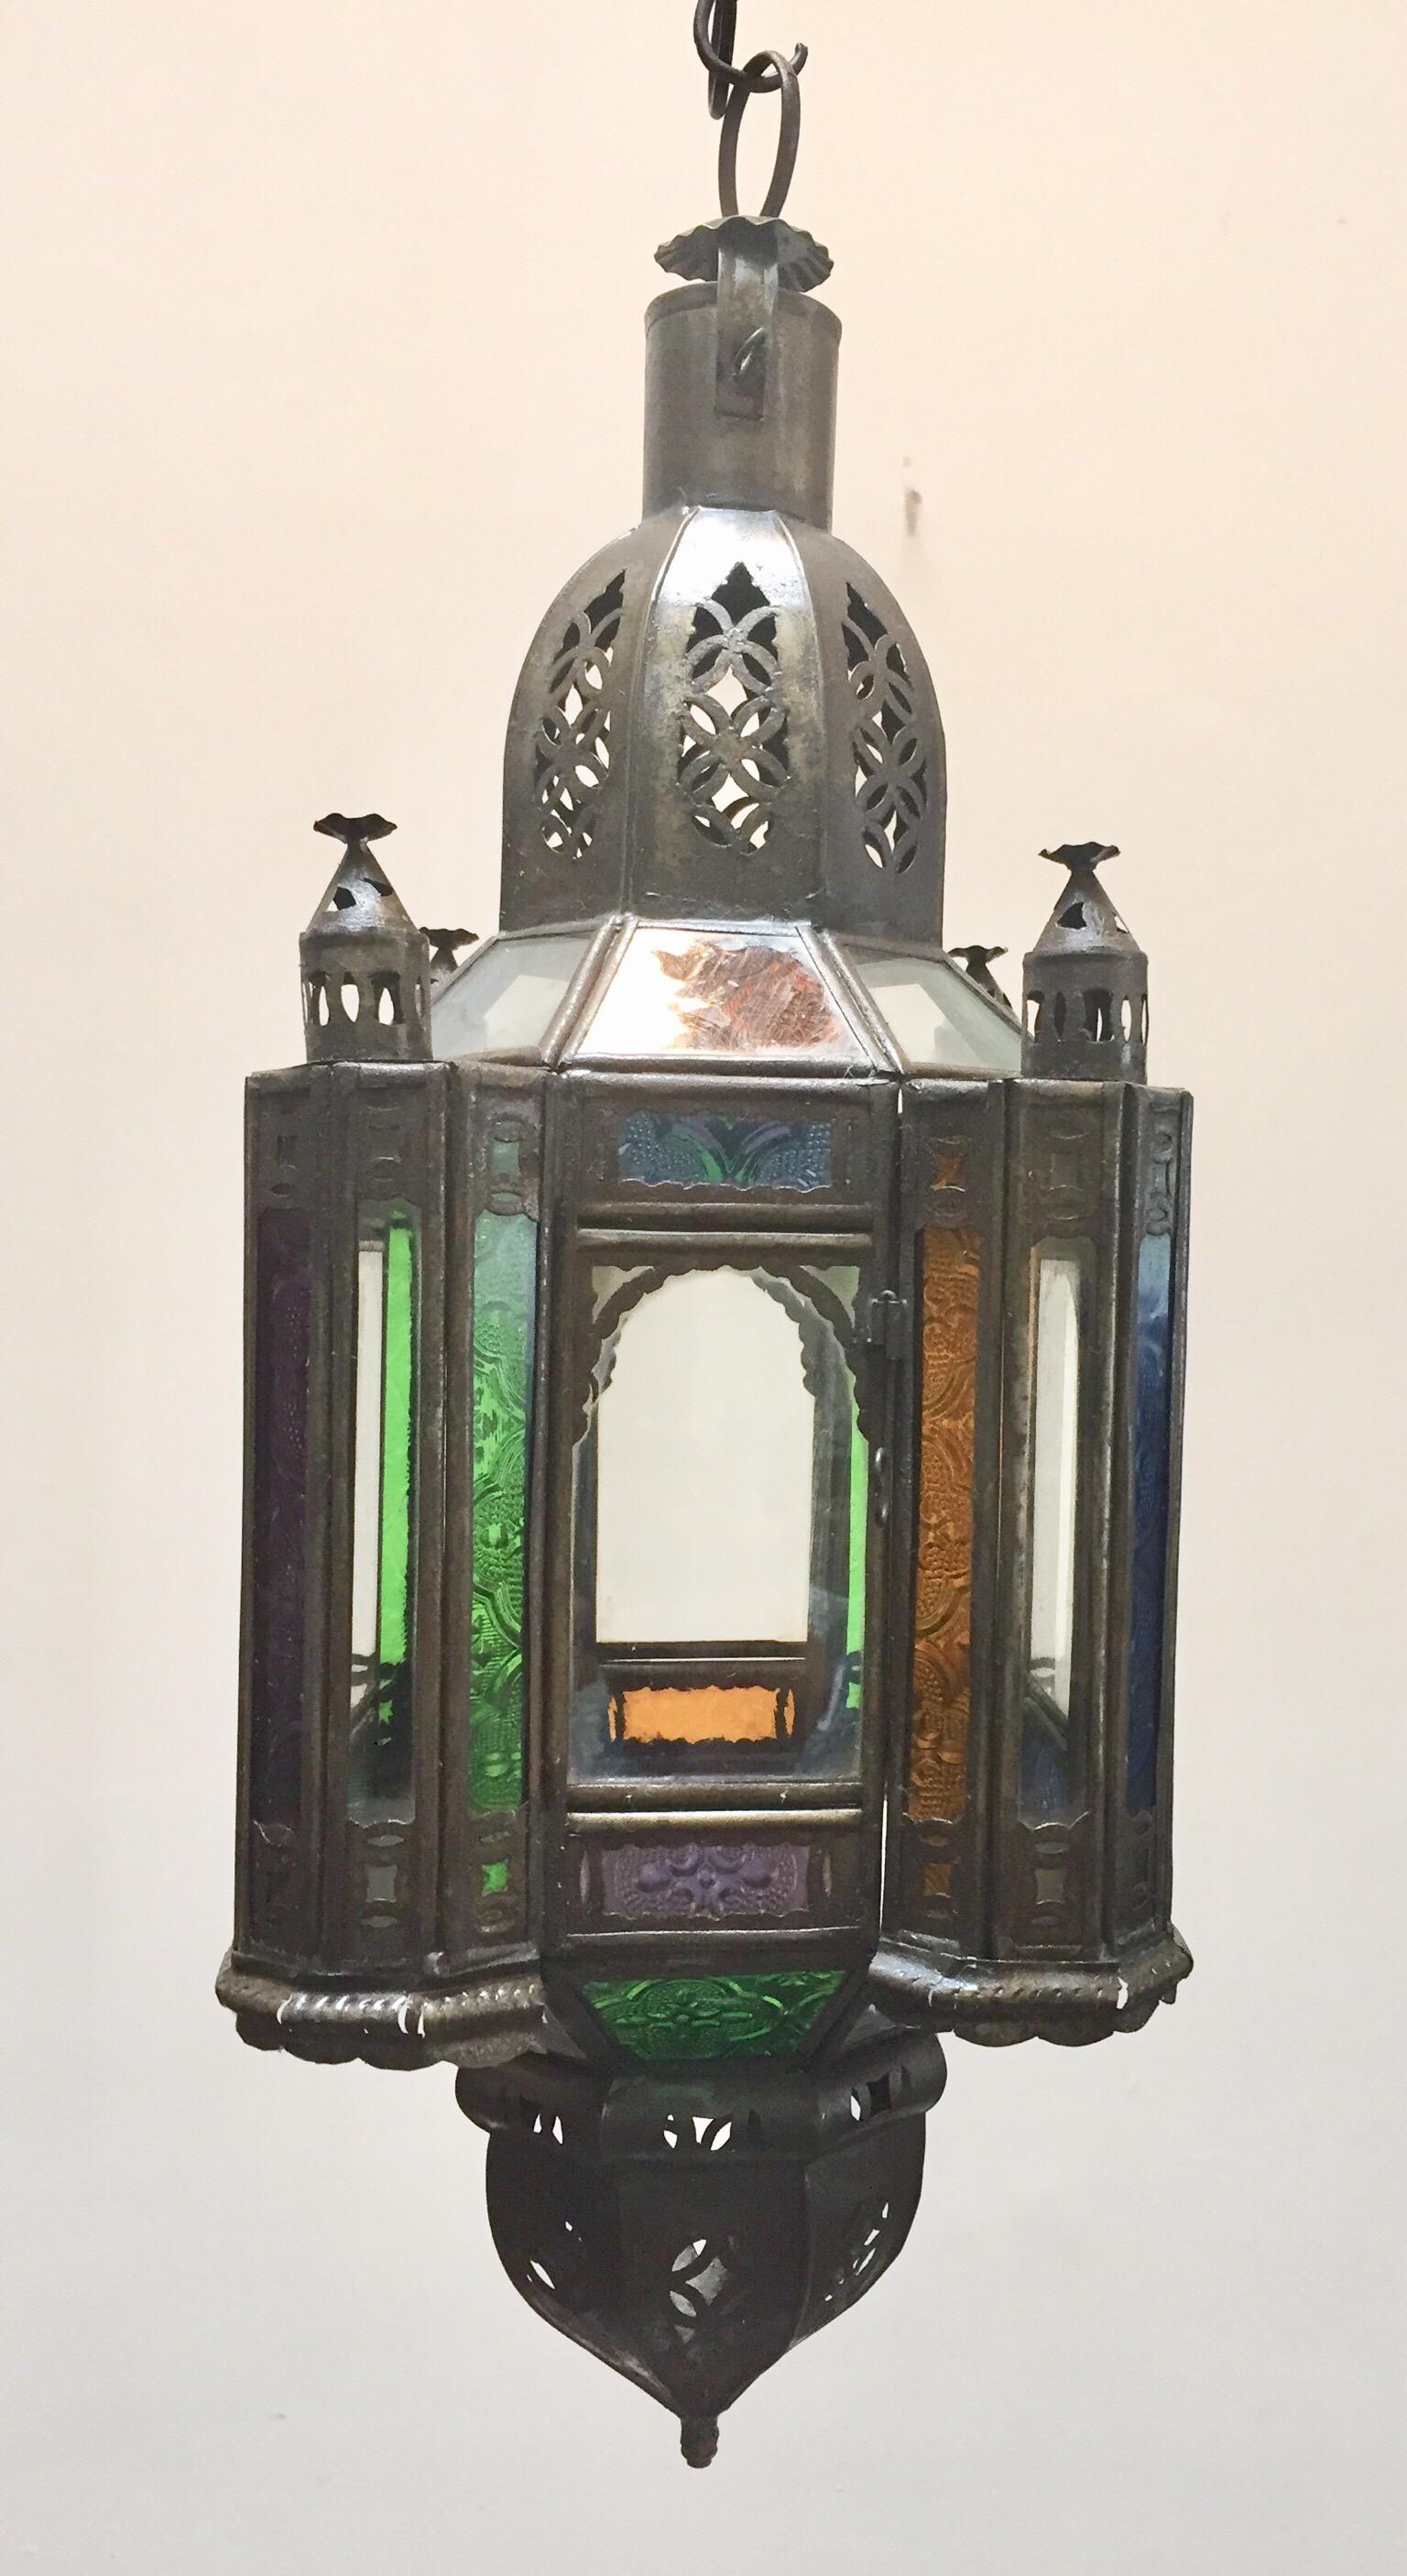 Stylish handcrafted Moroccan lantern pendant with multi-color molded glass and metal with an antique bronze finish.
Handmade with small cut-glass with Moorish filigree metal designs.
For indoor or covered area use.
About the Moroccan lanterns:
The